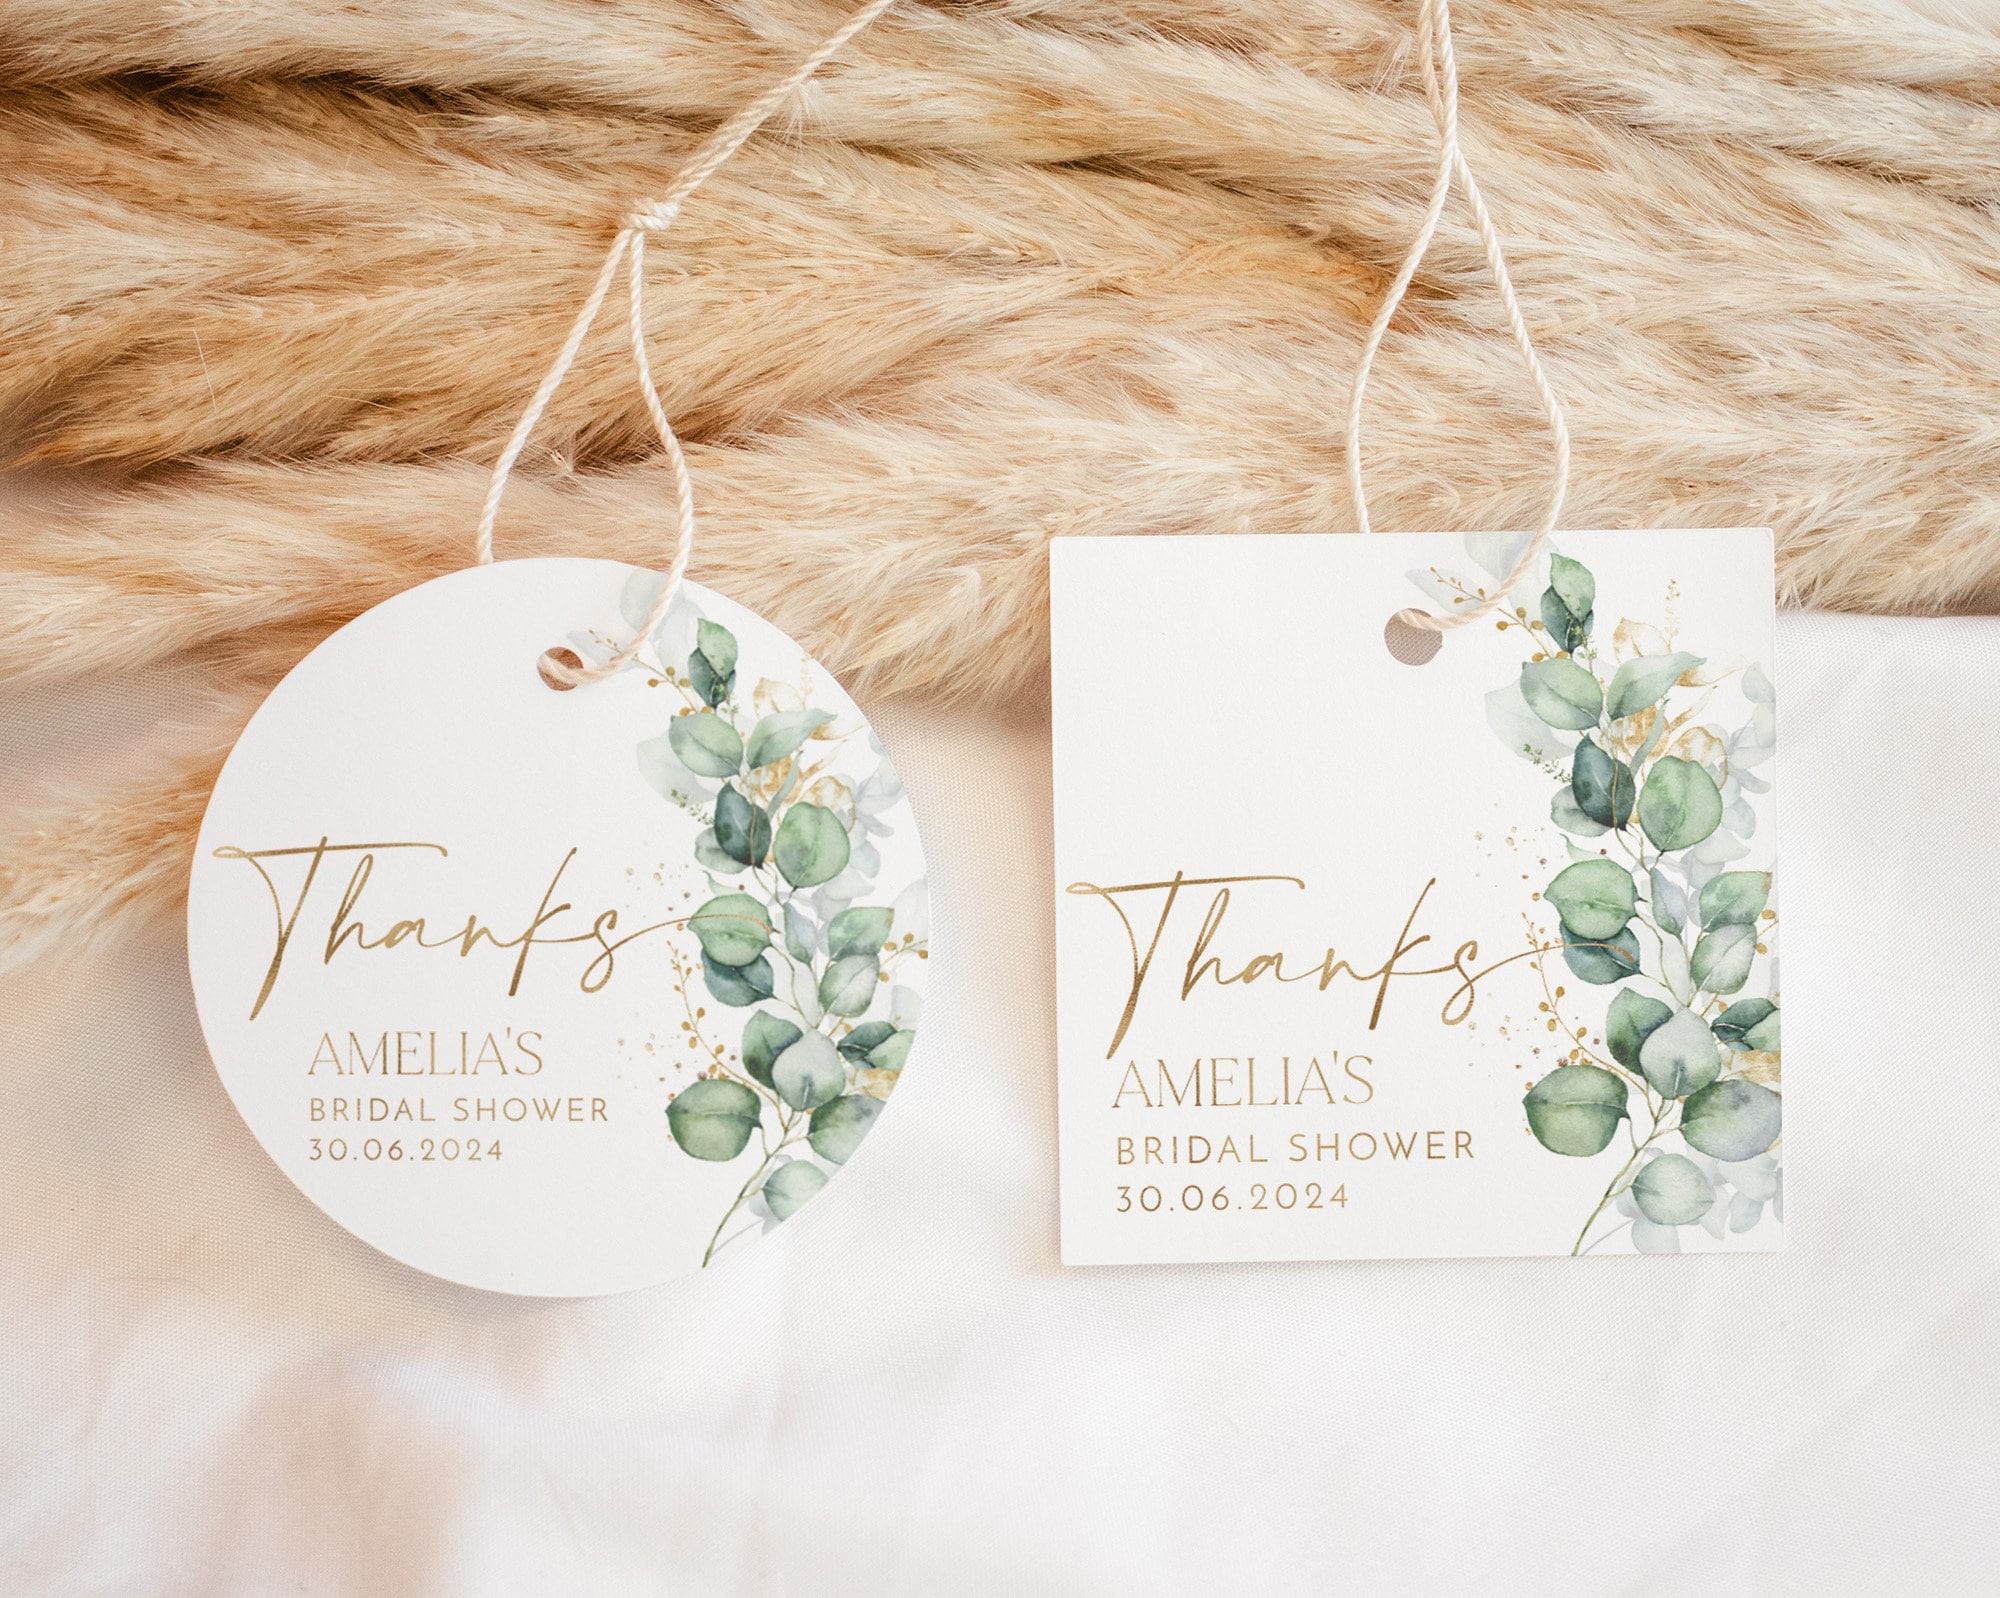 Bridal Shower Favour Tags, Editable Tags, Greenery Favor Tags, Green Gold Favour Tags, Thank You Tag, Bridal Gift Tags, Green Thank You Tag